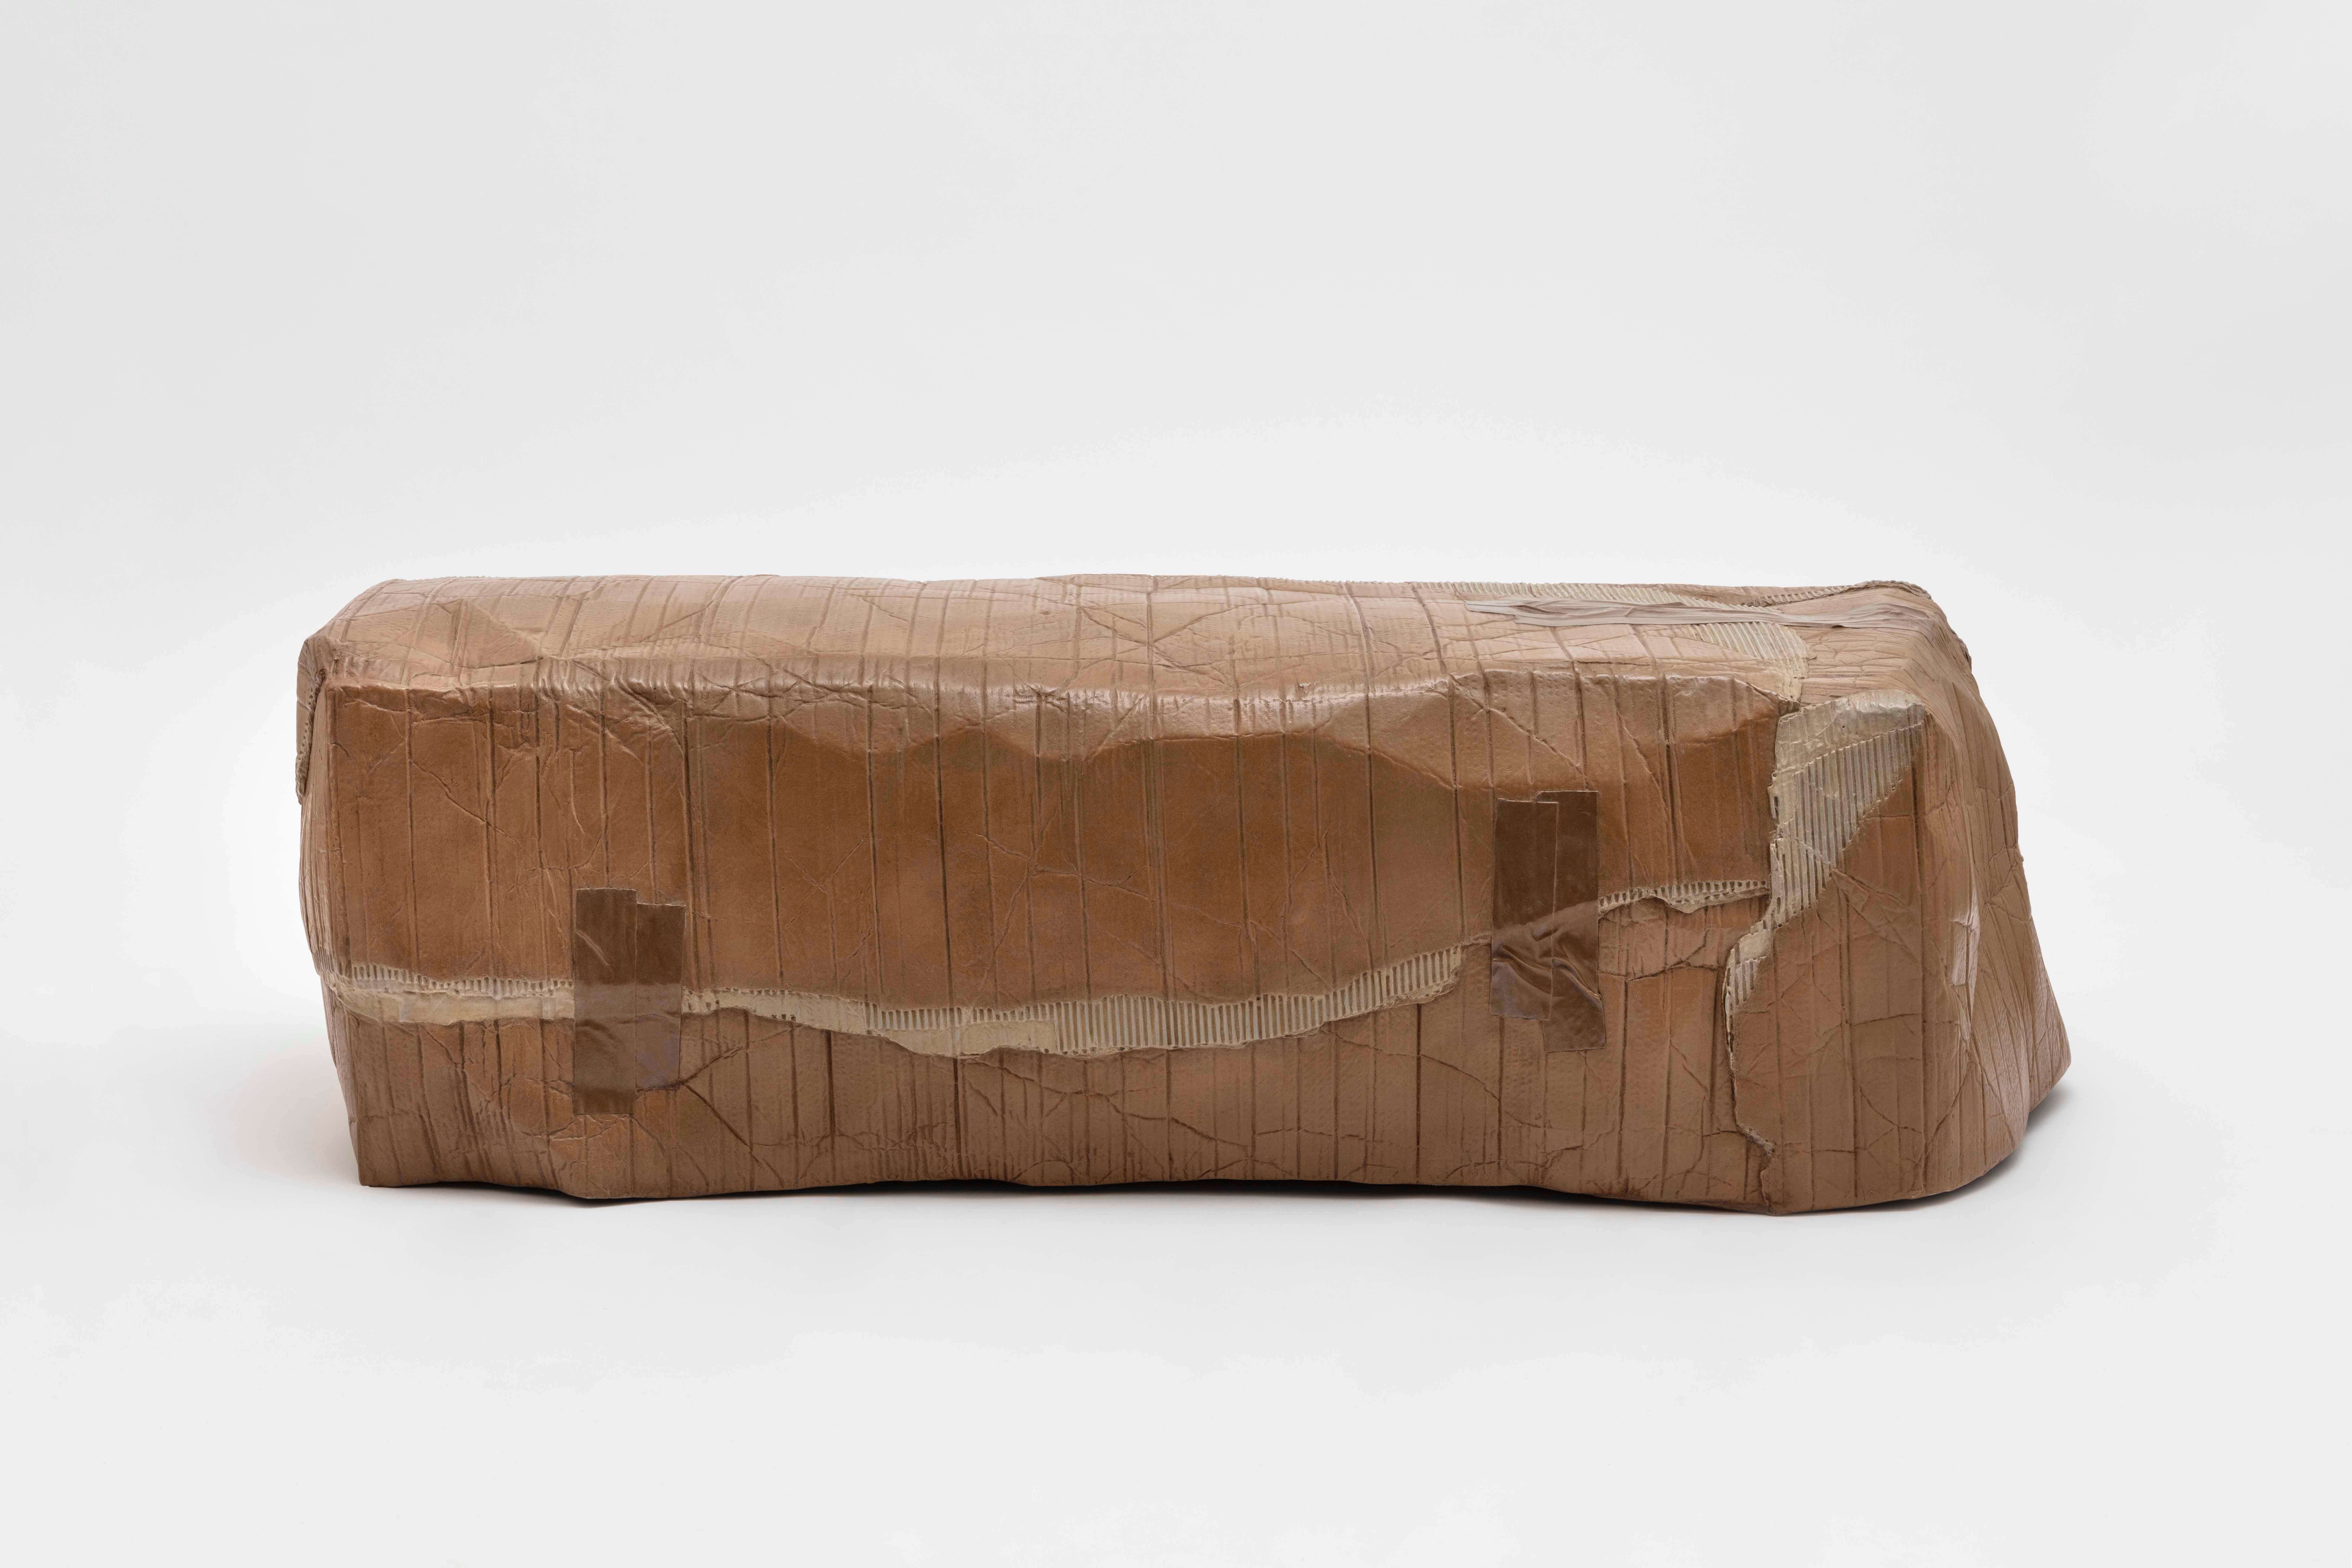 Faye Toogood [British, b. 1977]
Maquette 031 / Box bench, 2020
Cast bronze, acrylic paint
Measures: 18.5 x 59 x 22.75 inches
47 x 150 x 58 cm

Faye Toogood was born in the UK in 1977 and graduated with a BA in the History of Art in 1998 from Bristol